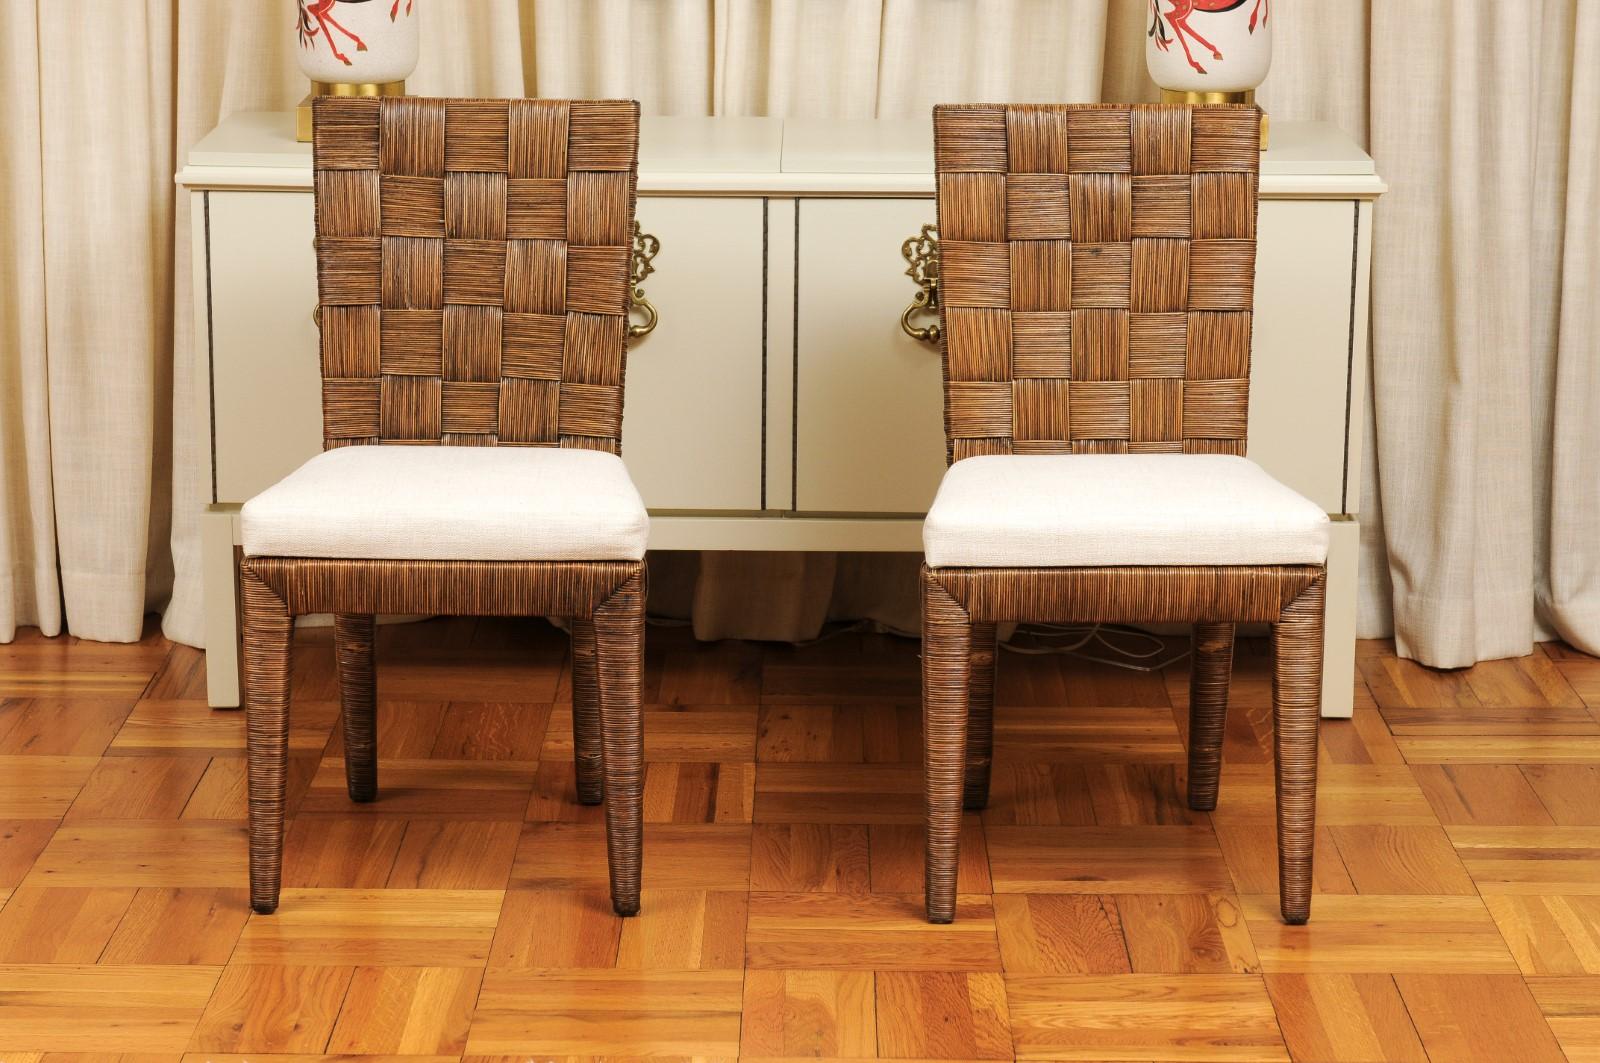 Stellar Restored Set of 8 Block Island Cane Chairs by John Hutton for Donghia For Sale 2